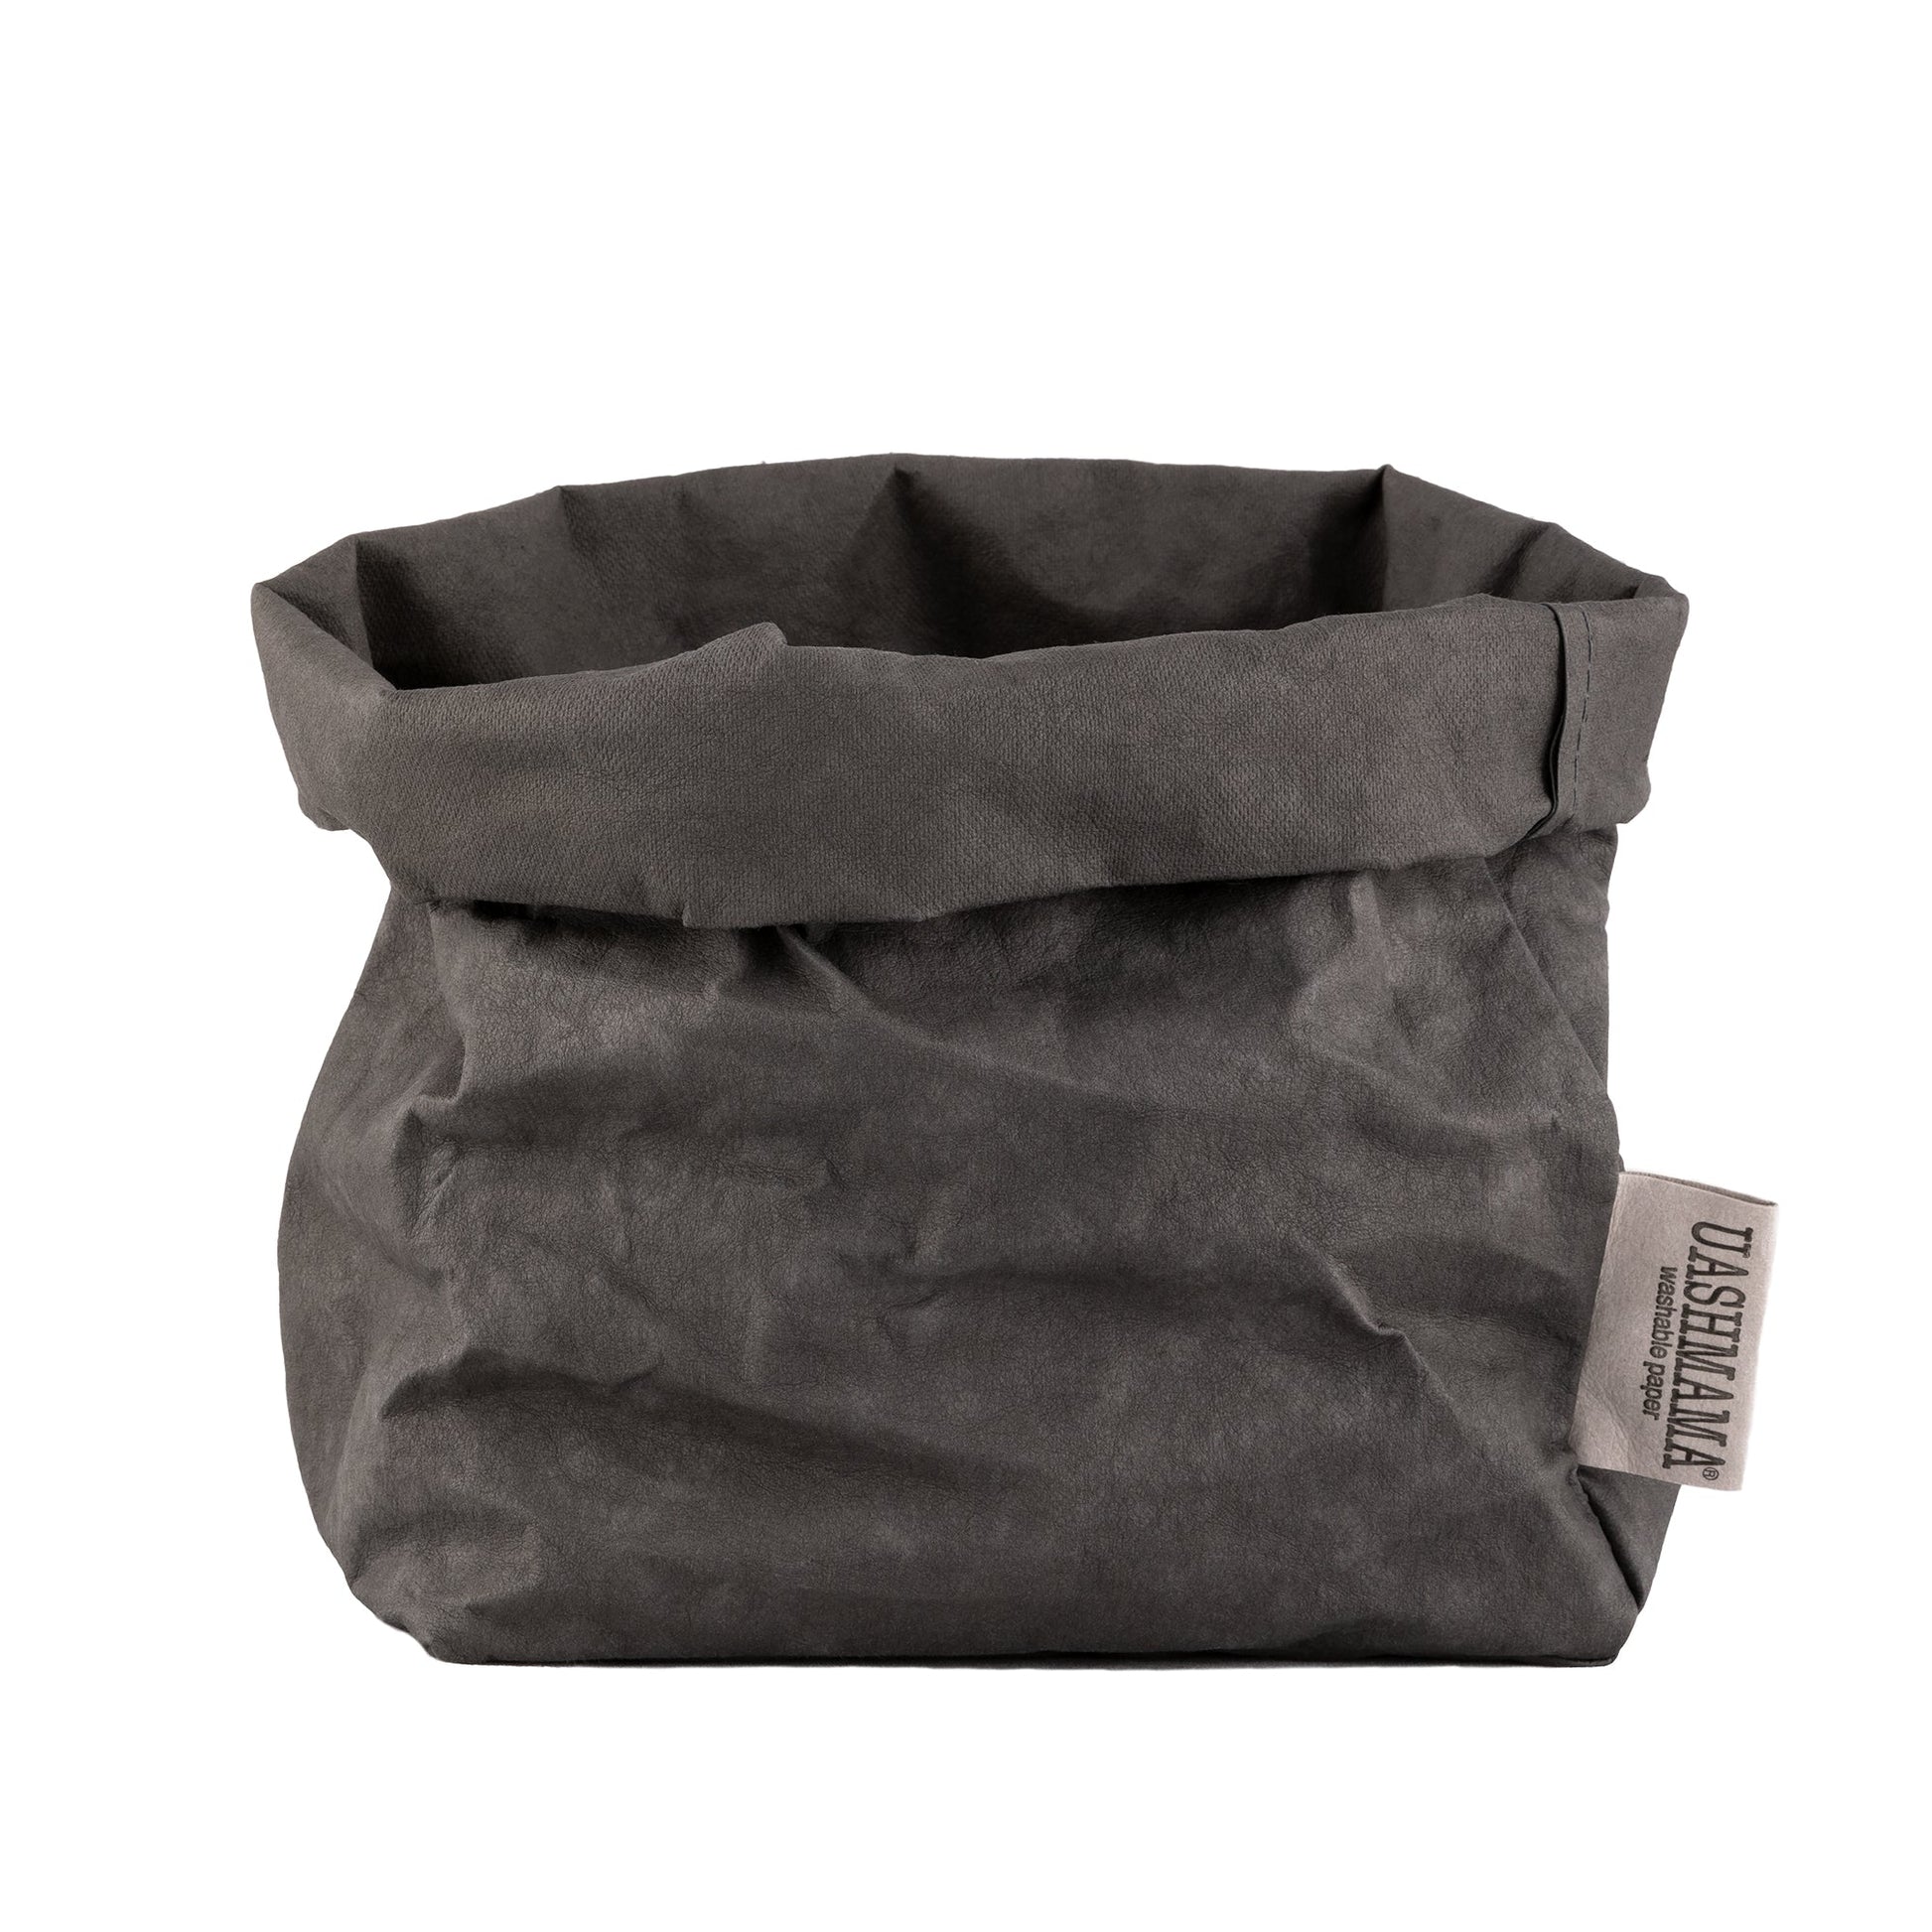 A washable paper bag is shown. The bag is rolled down at the top and features a UASHMAMA logo label on the bottom left corner. The bag pictured is the medium size in dark grey.